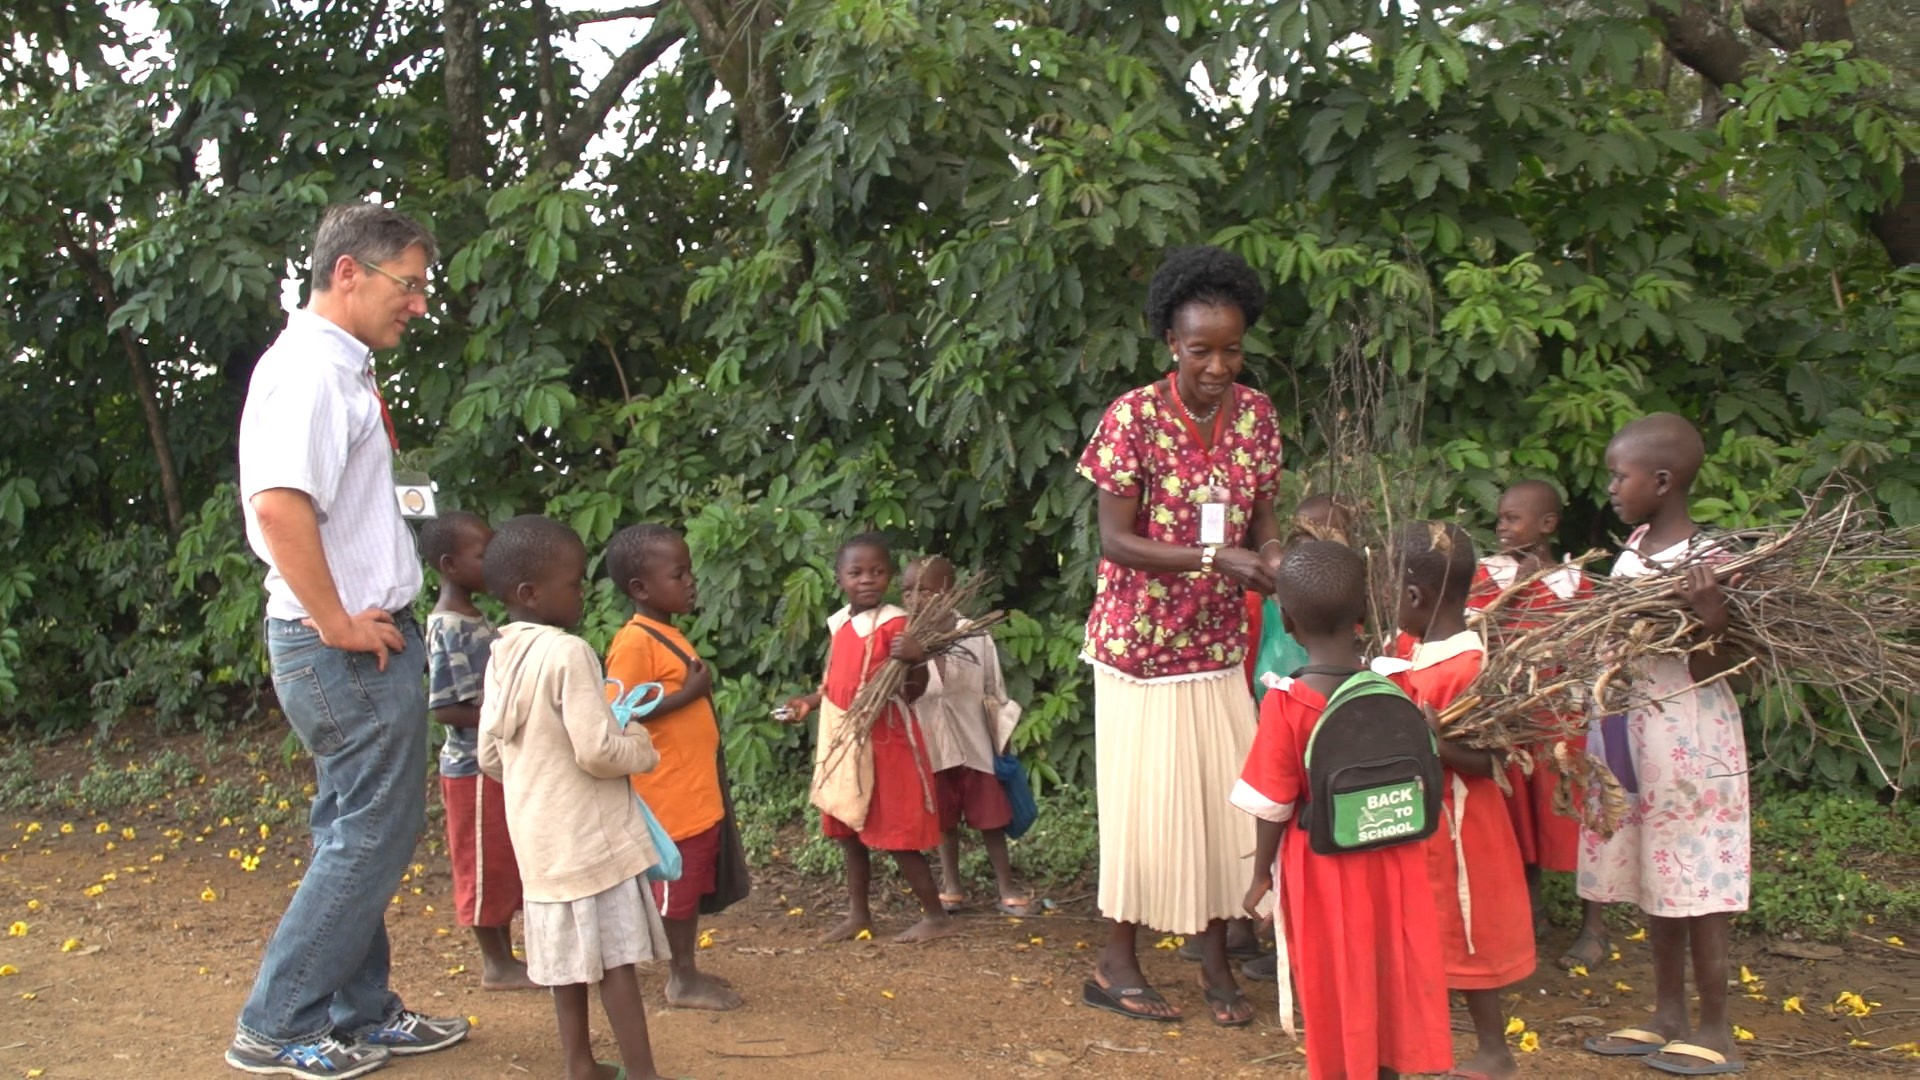 Dr. Jonathan Kurtis talks with and adult and a group of children in a rural village.